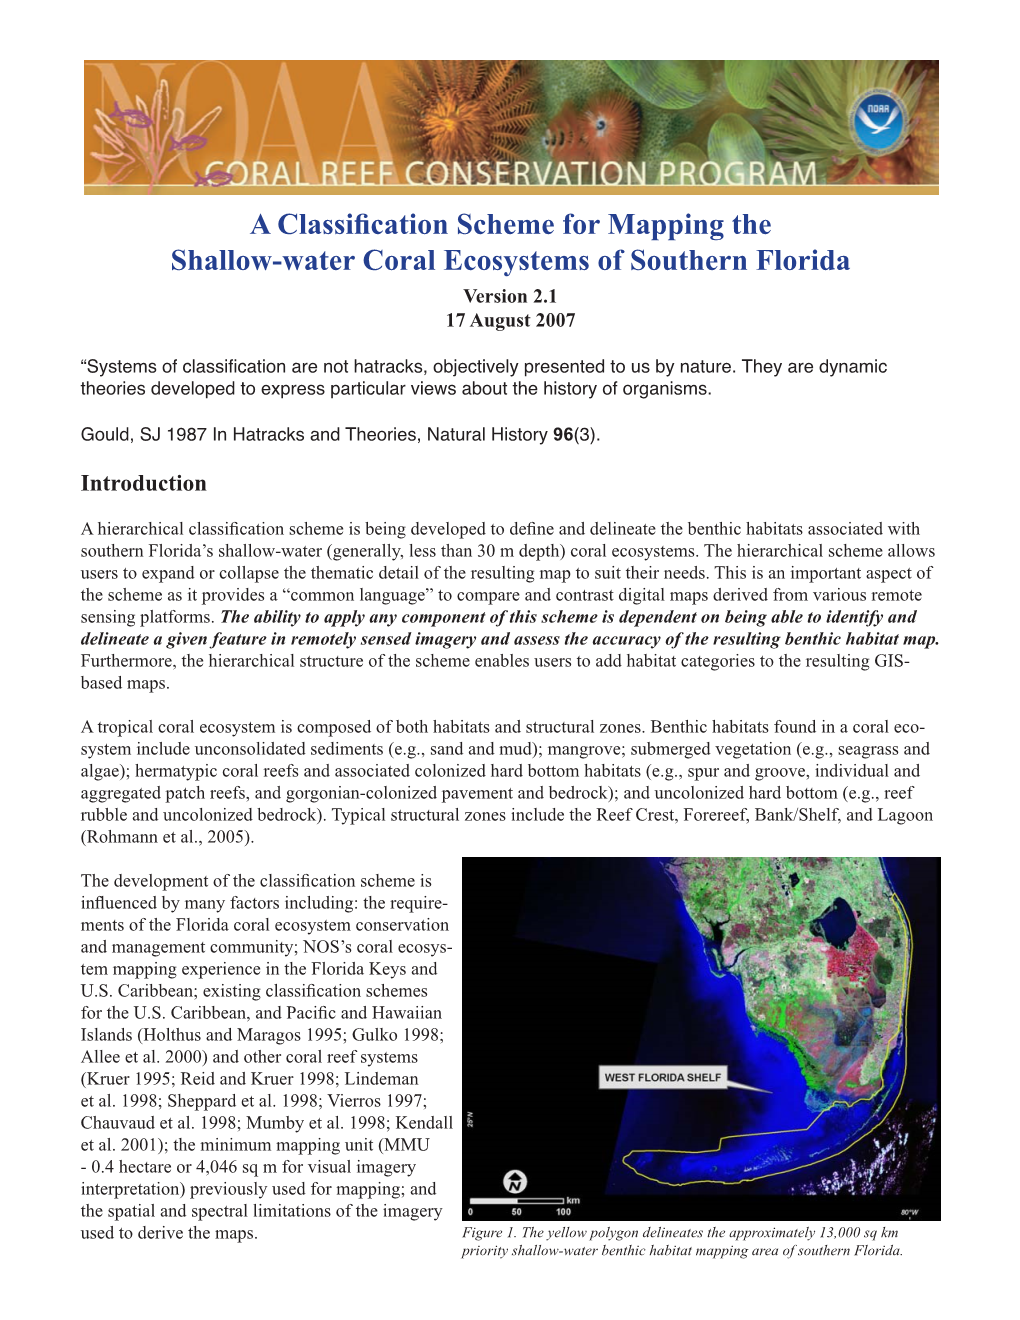 A Classification Scheme for Mapping the Shallow-Water Coral Ecosystems of Southern Florida Version 2.1 17 August 2007